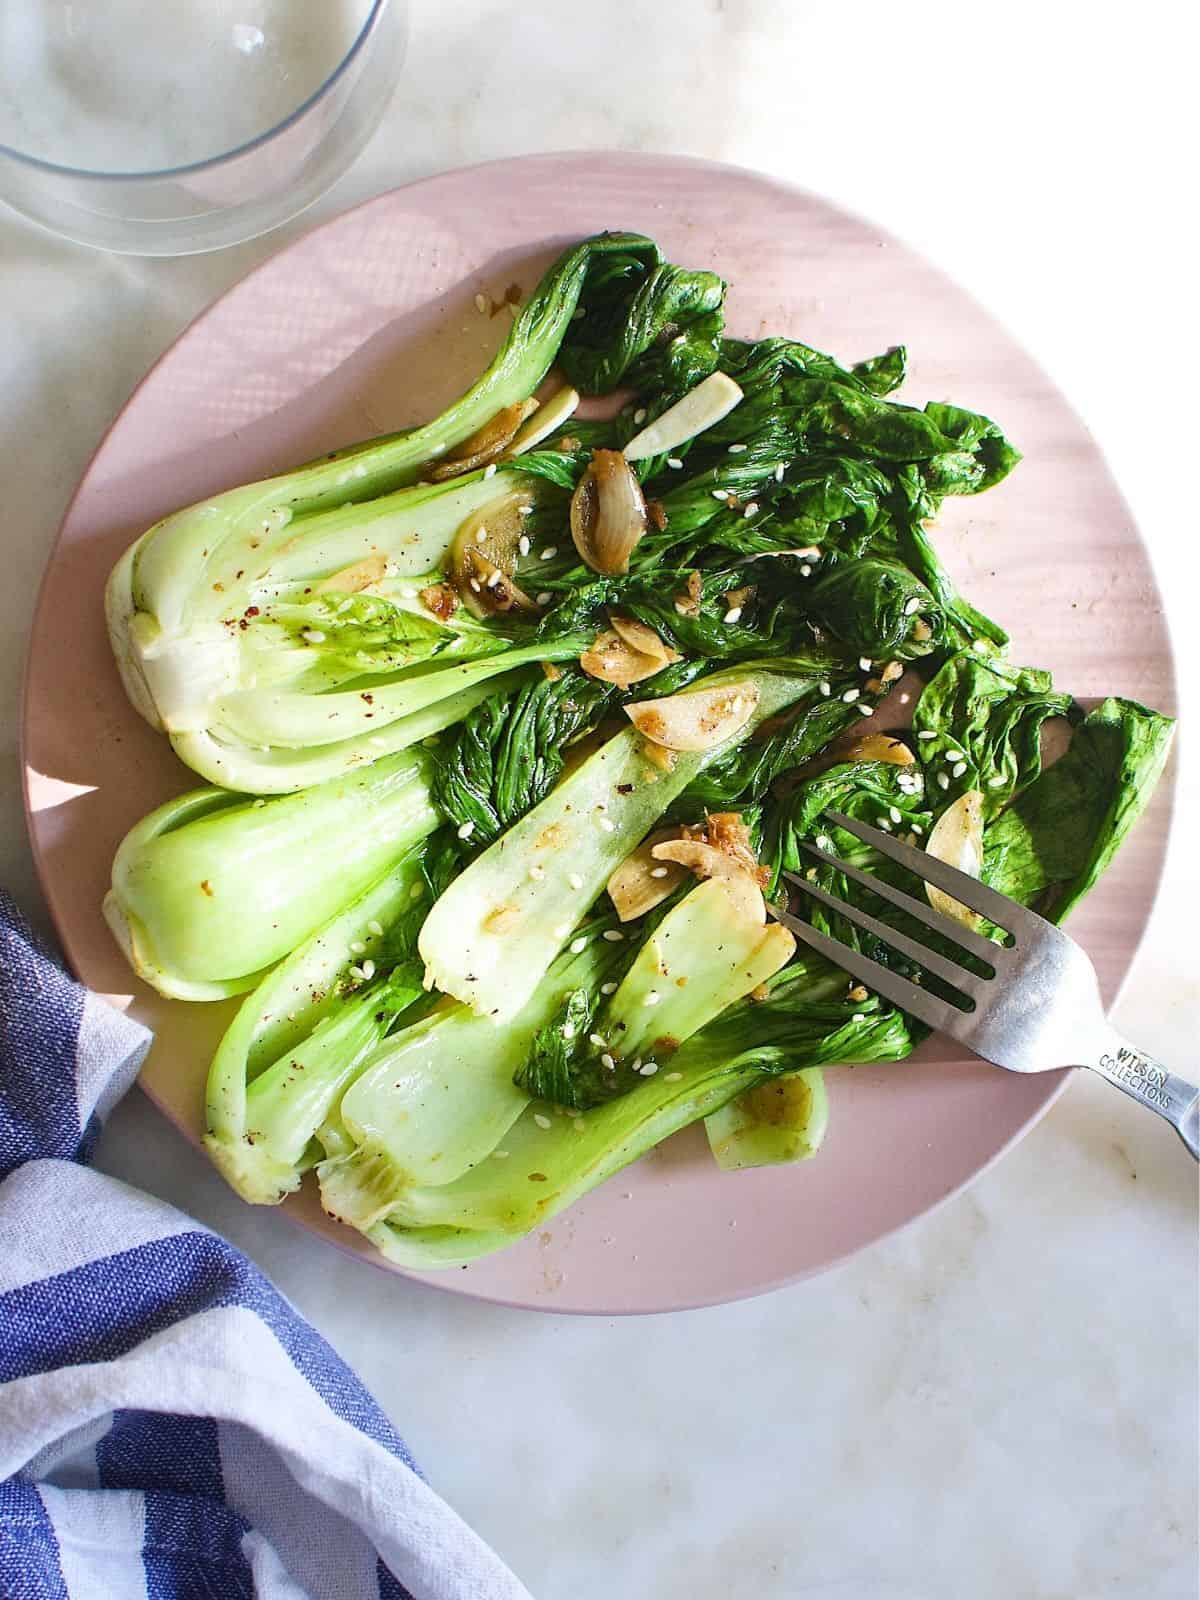 cooked bok choy, seasoned with garlic and ginger, on a plate.